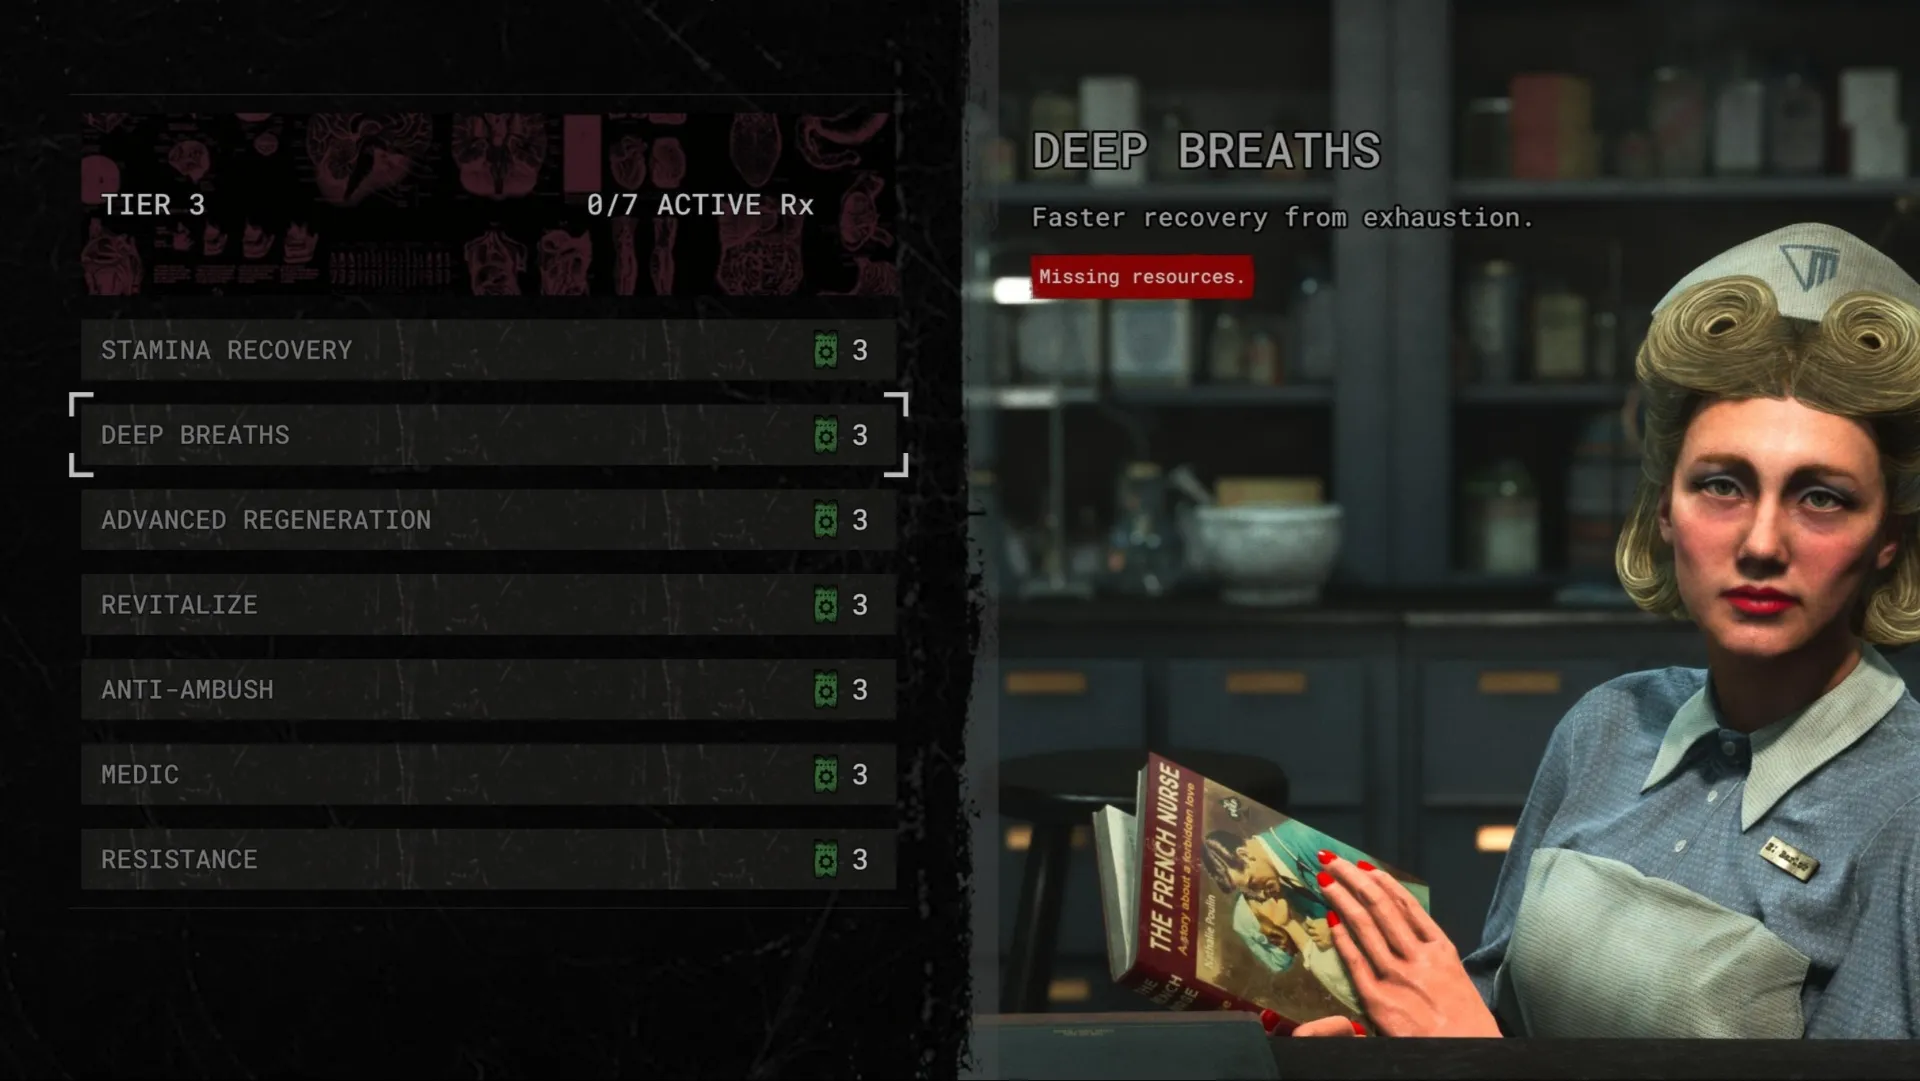 The third tier of prescriptions in The Outlast Trials.